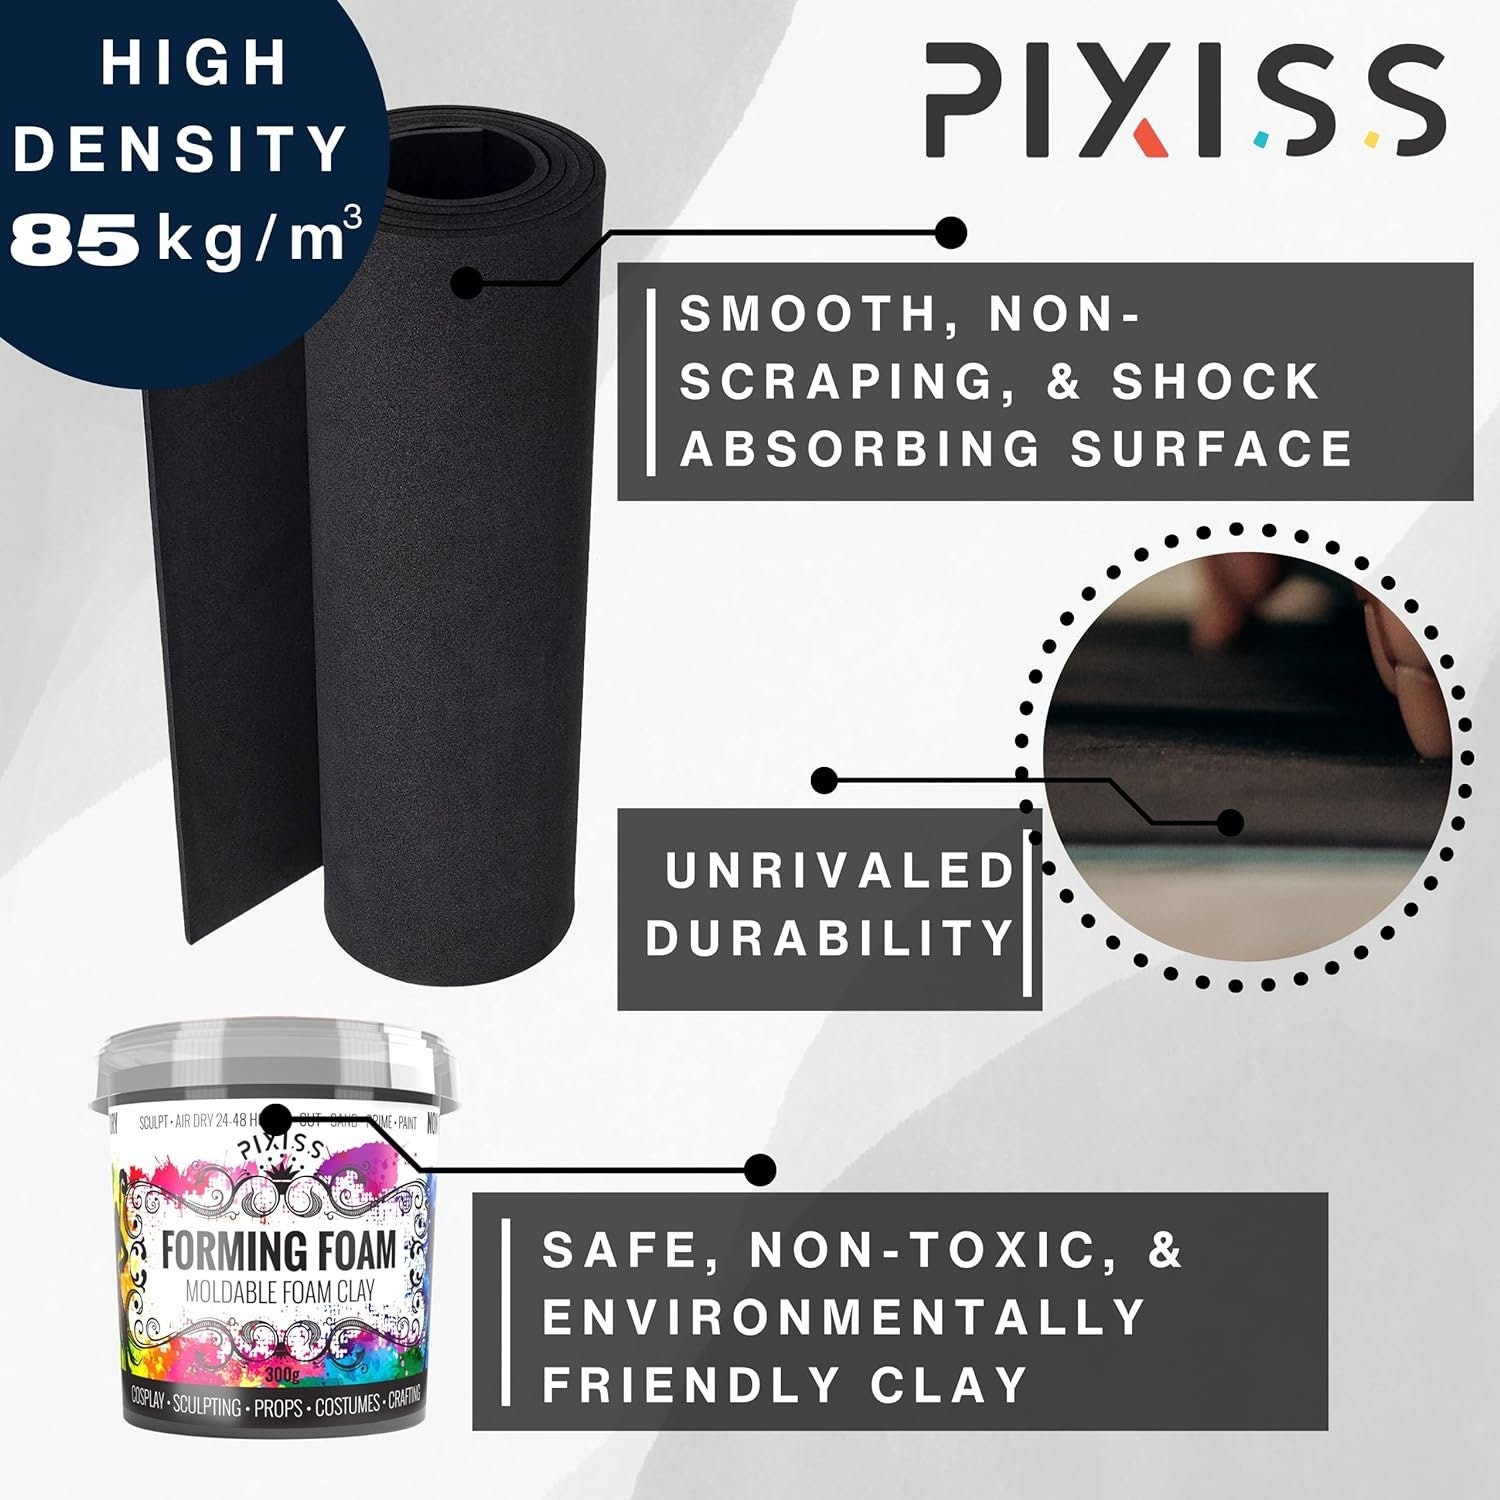 Pixiss Foam Clay Air Dry Modeling Clay 300 Gram Gray - Moldable